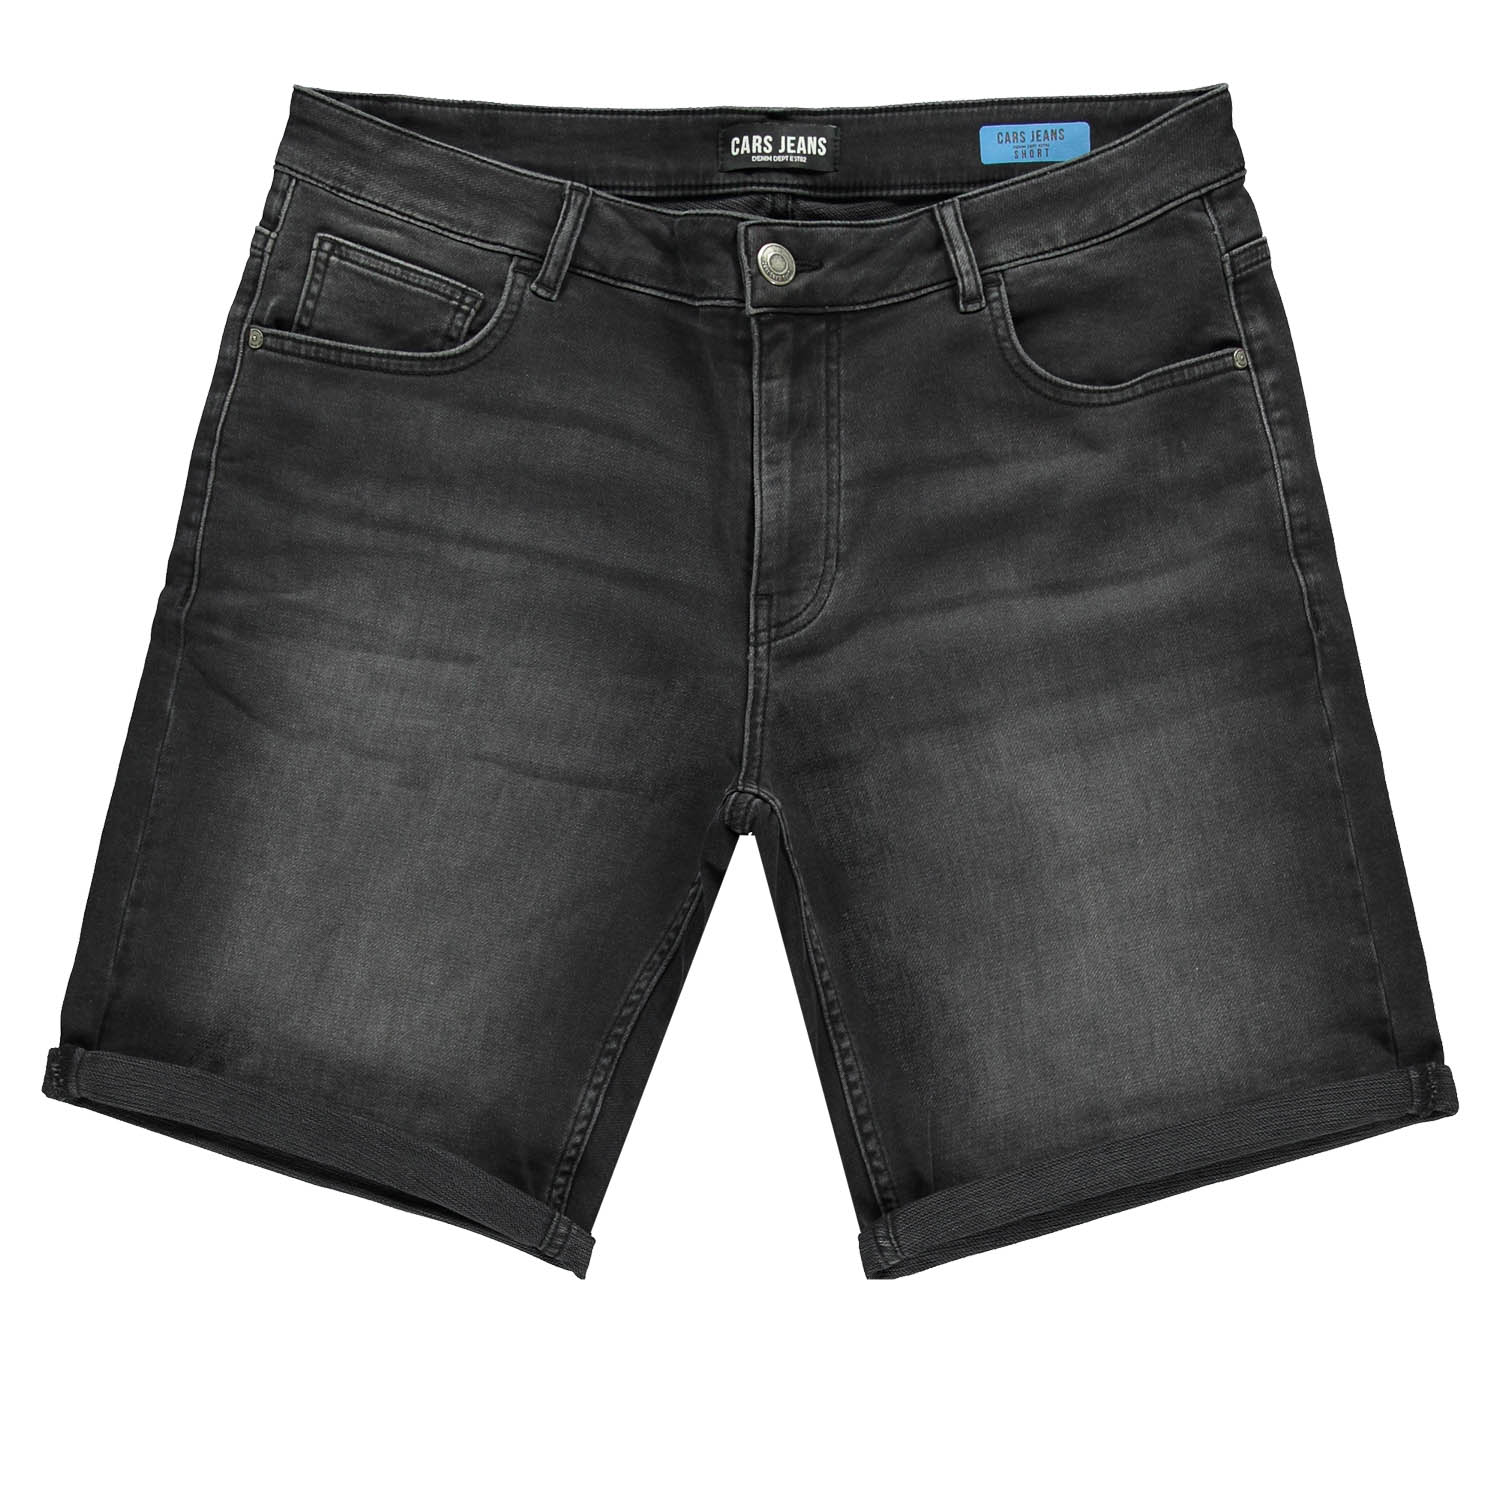 Cars Jeans CARDIFF Short SW Den.Black Used Heren Jeans - Black Used - Maat XL